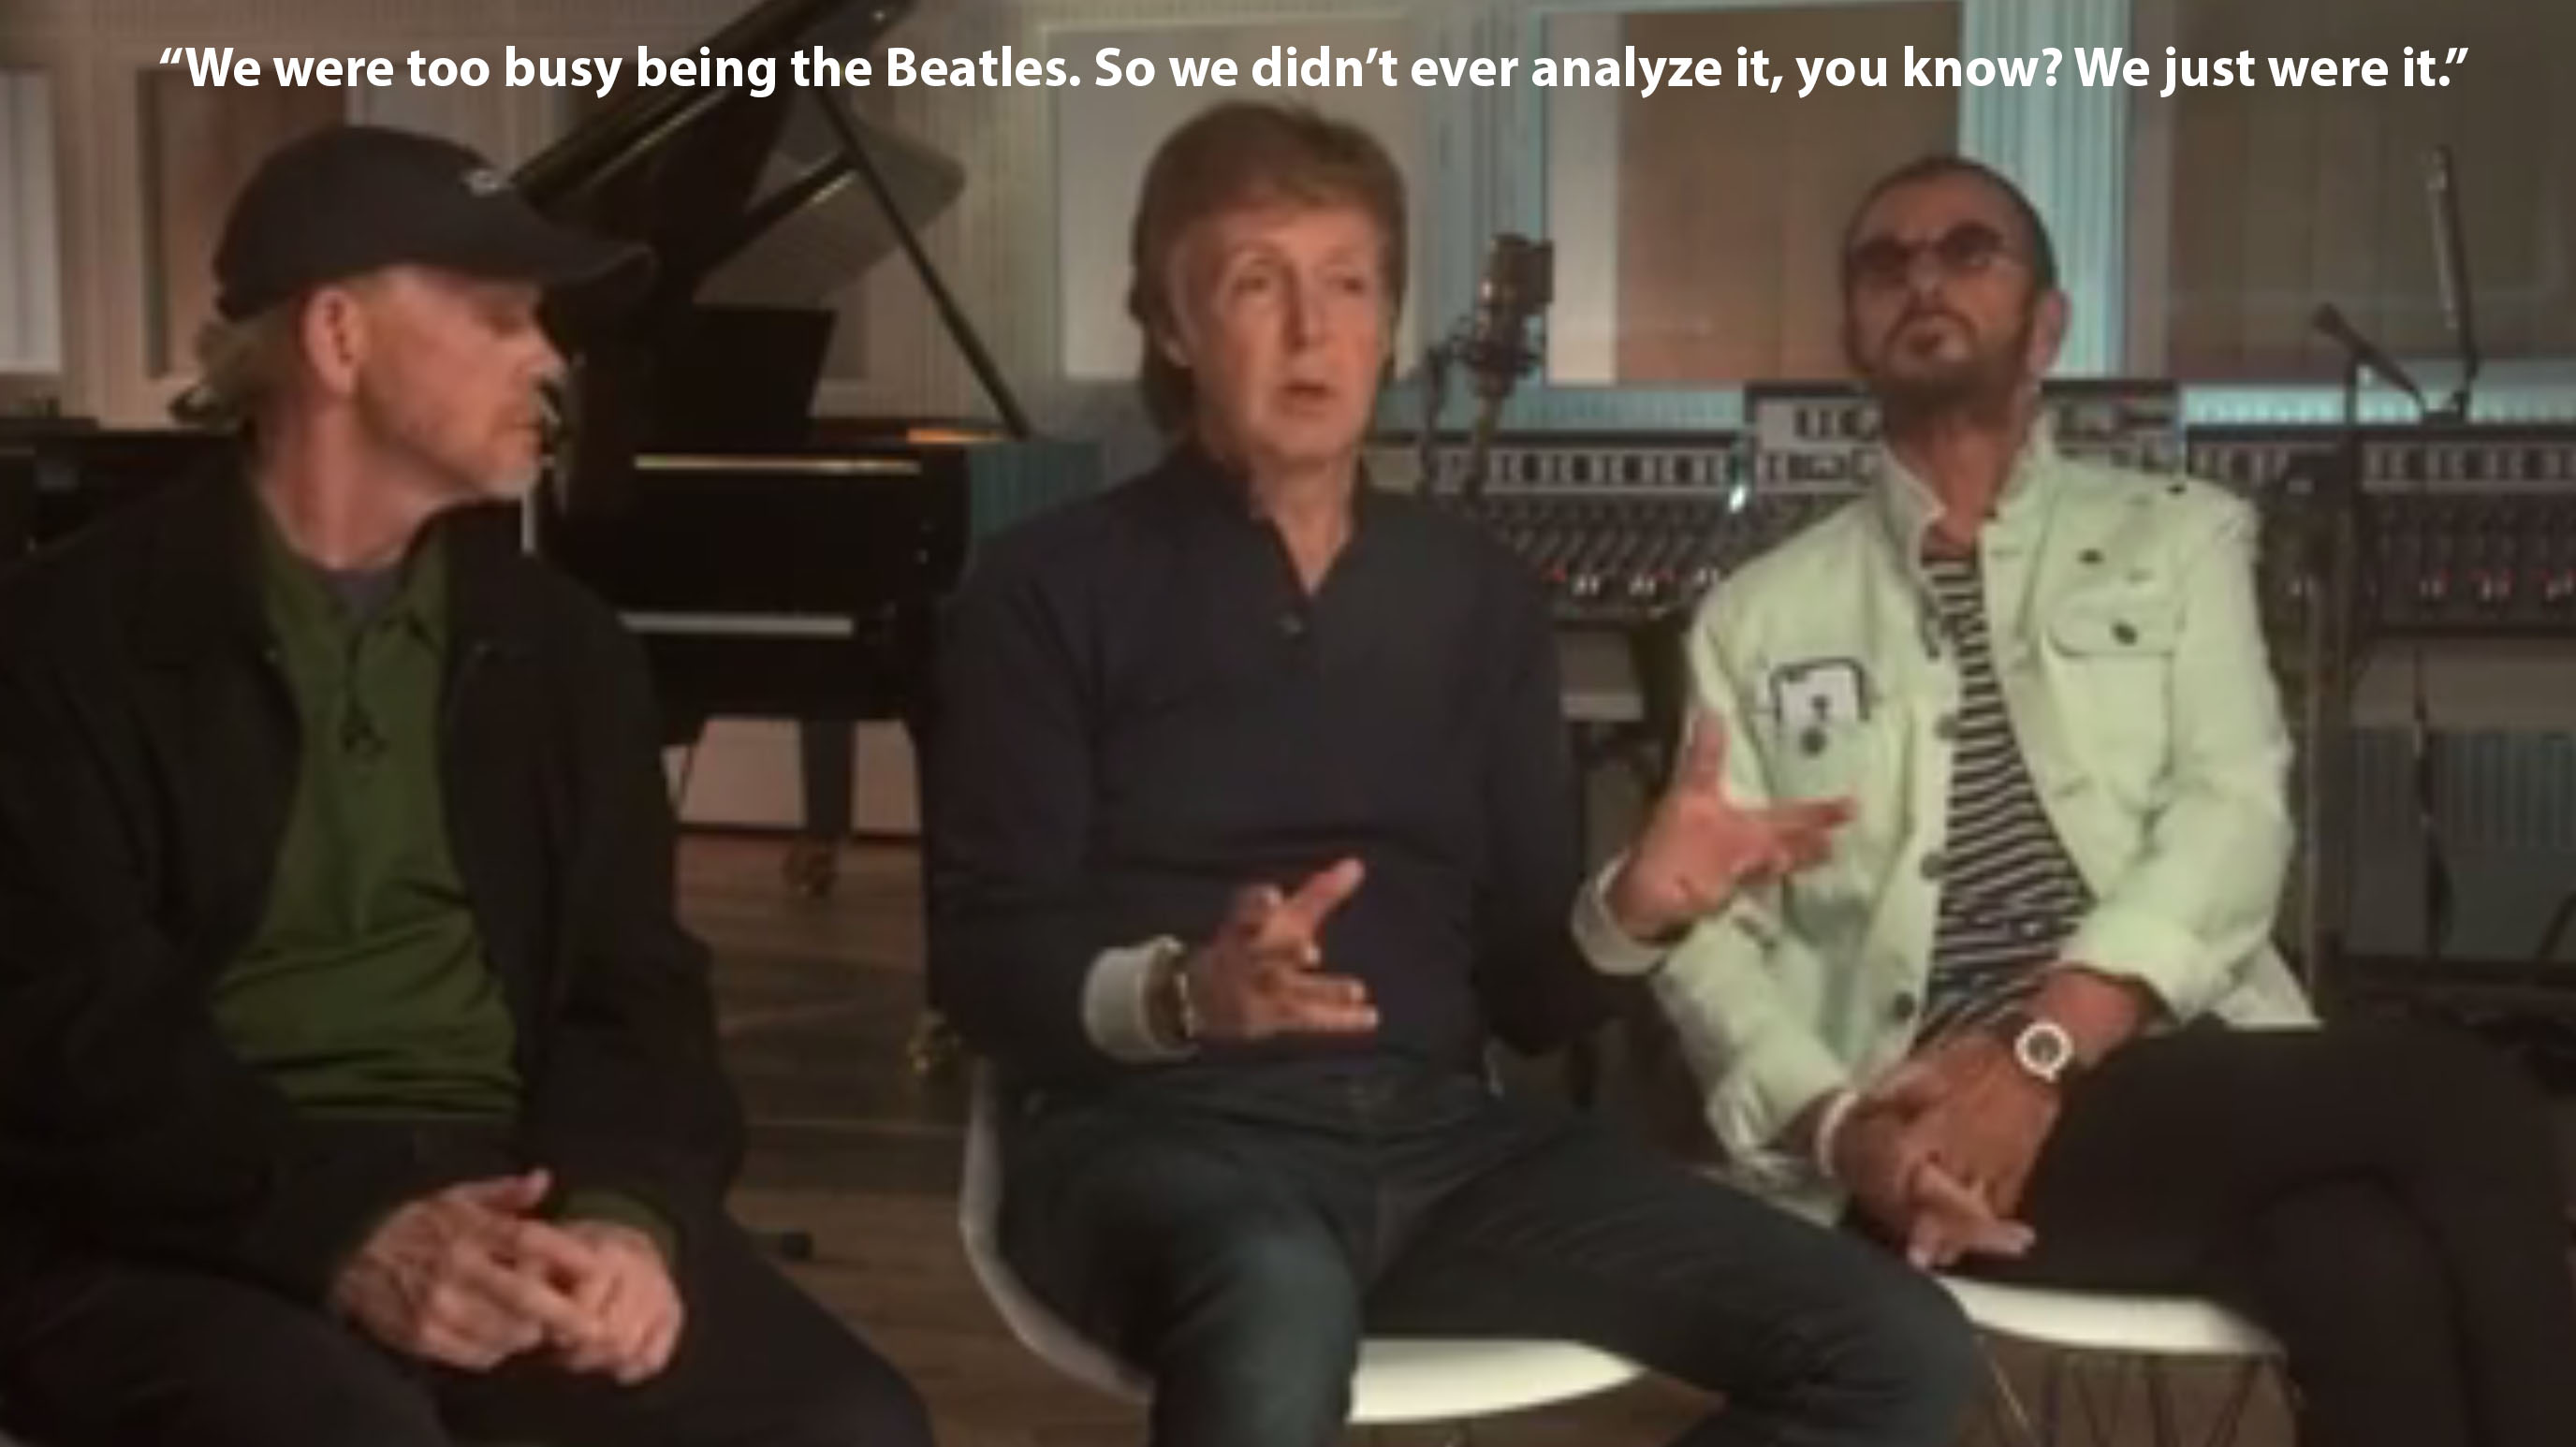 An image of Paul McCartney talking about the Beatles in an interview